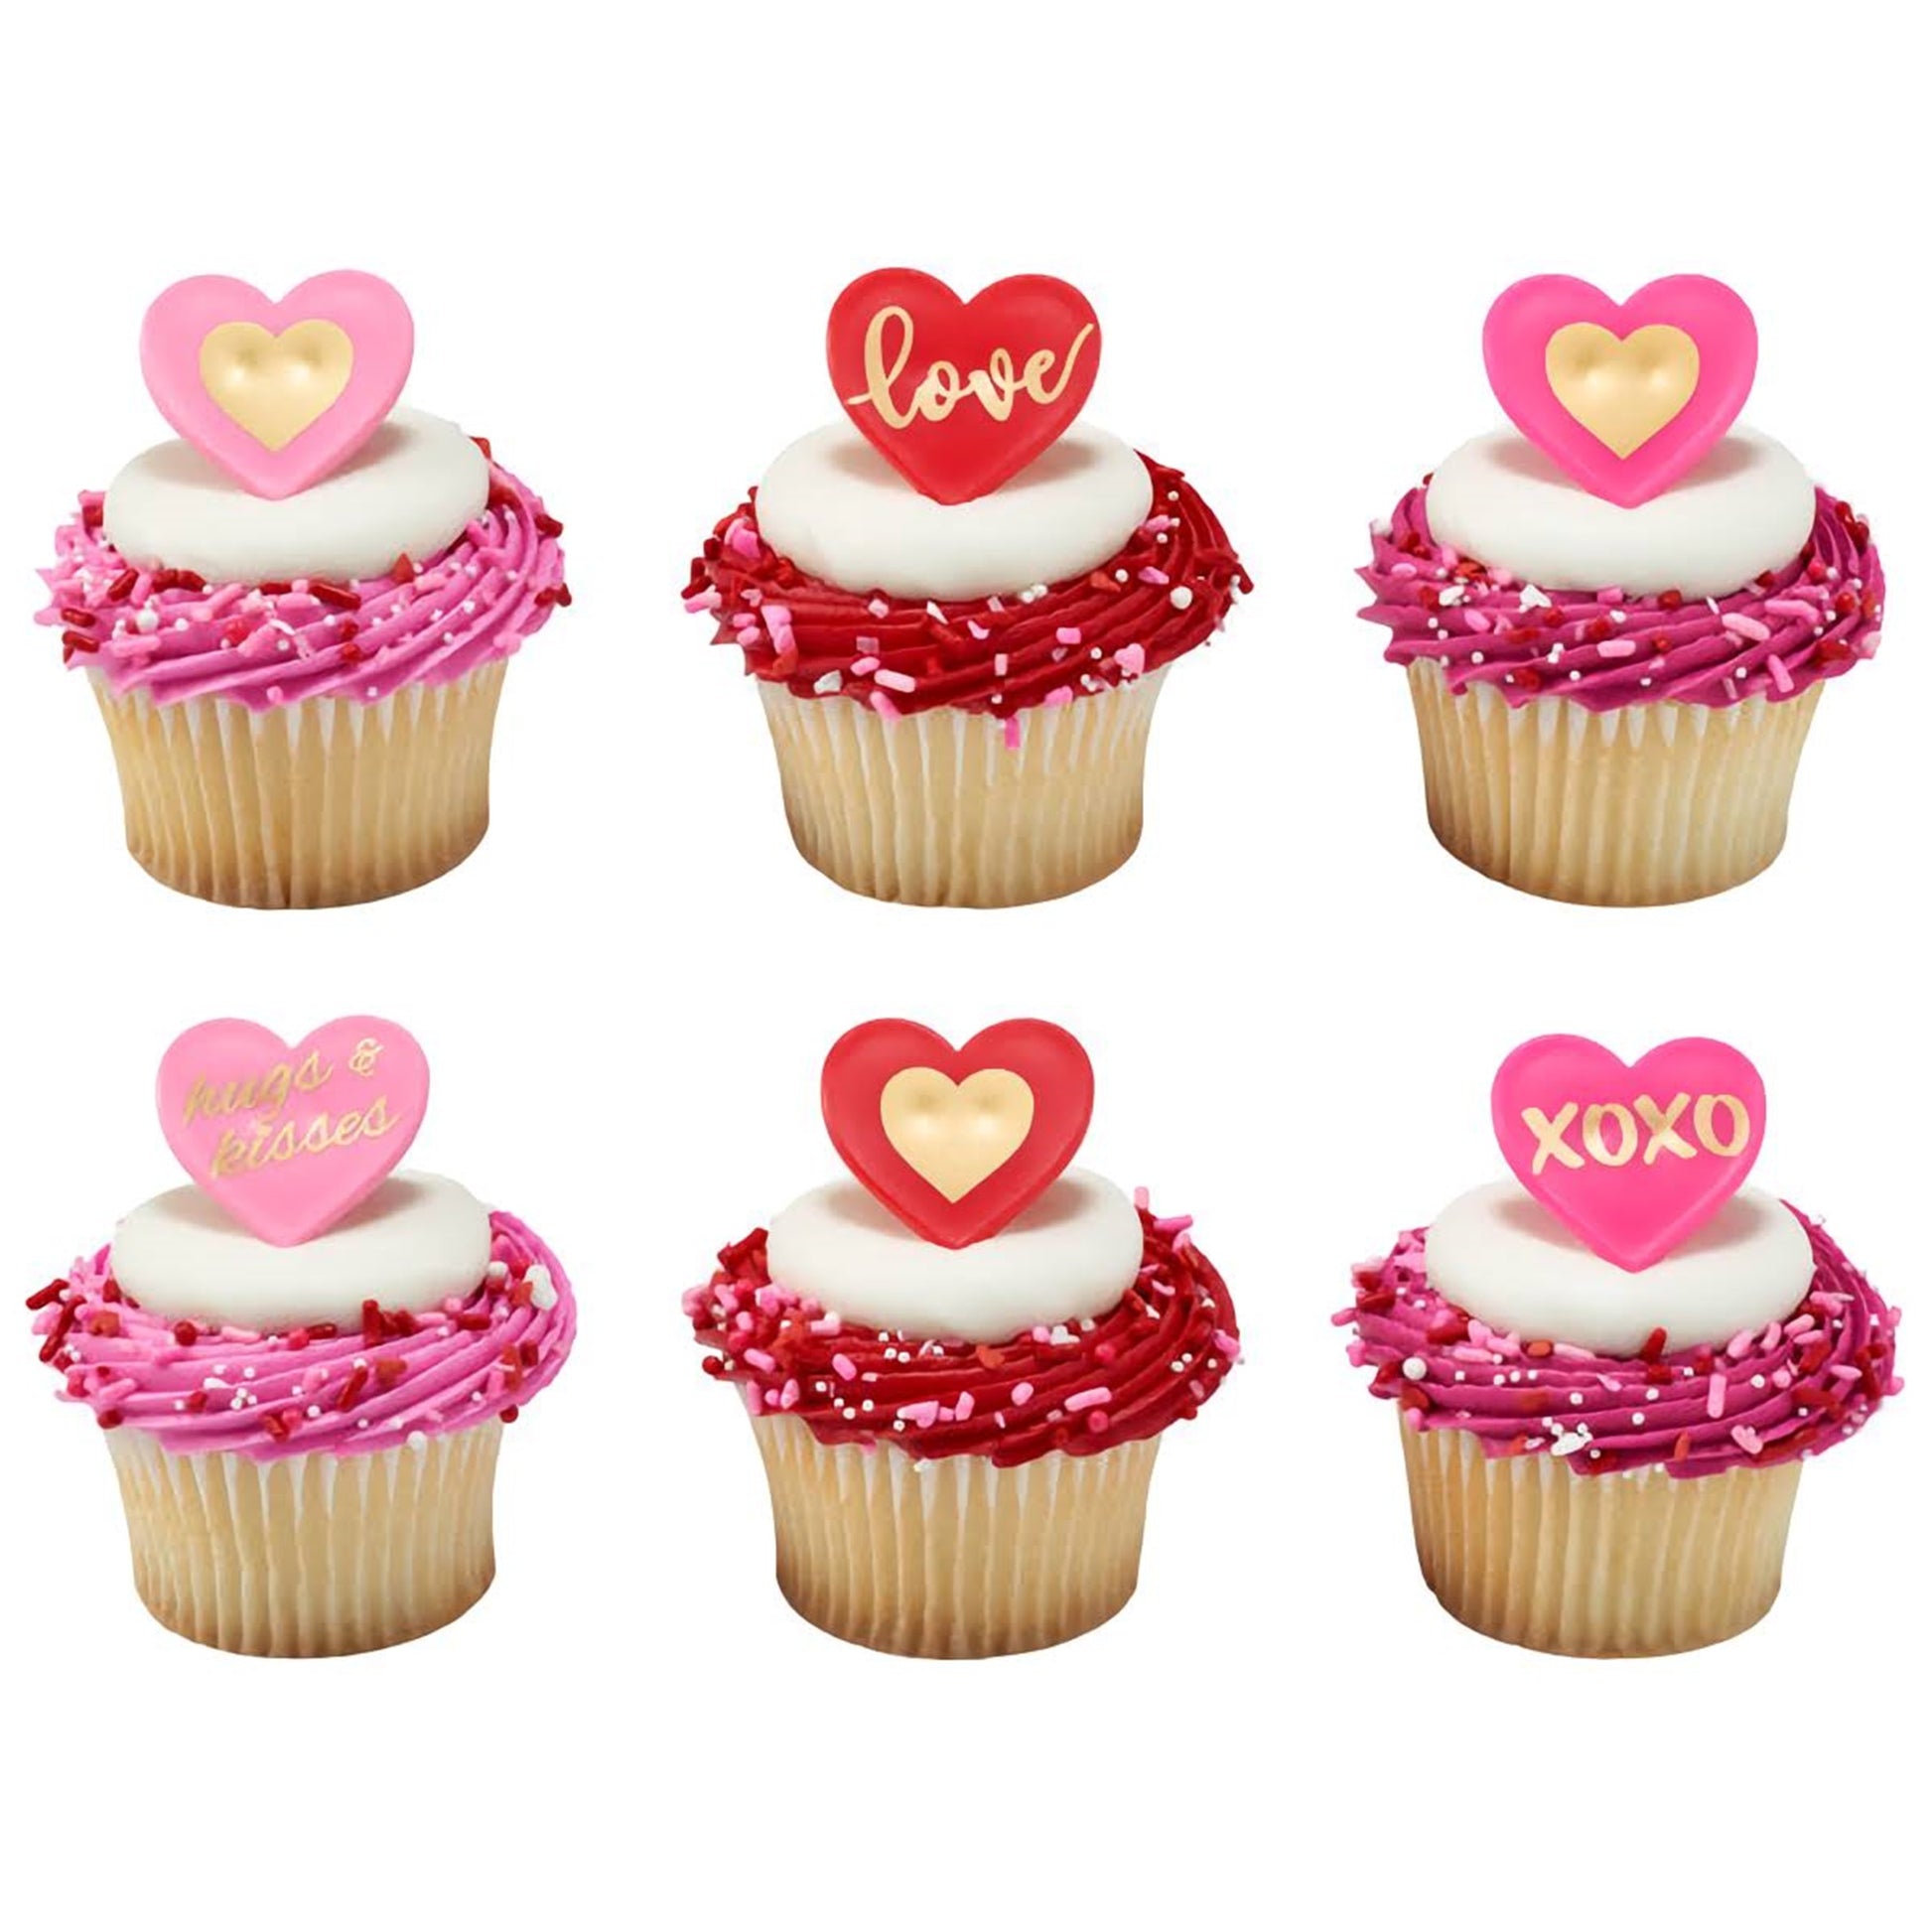 6 red and pink Heart Shaped Cupcake toppers each on top of a cupcake with red or pink frosting